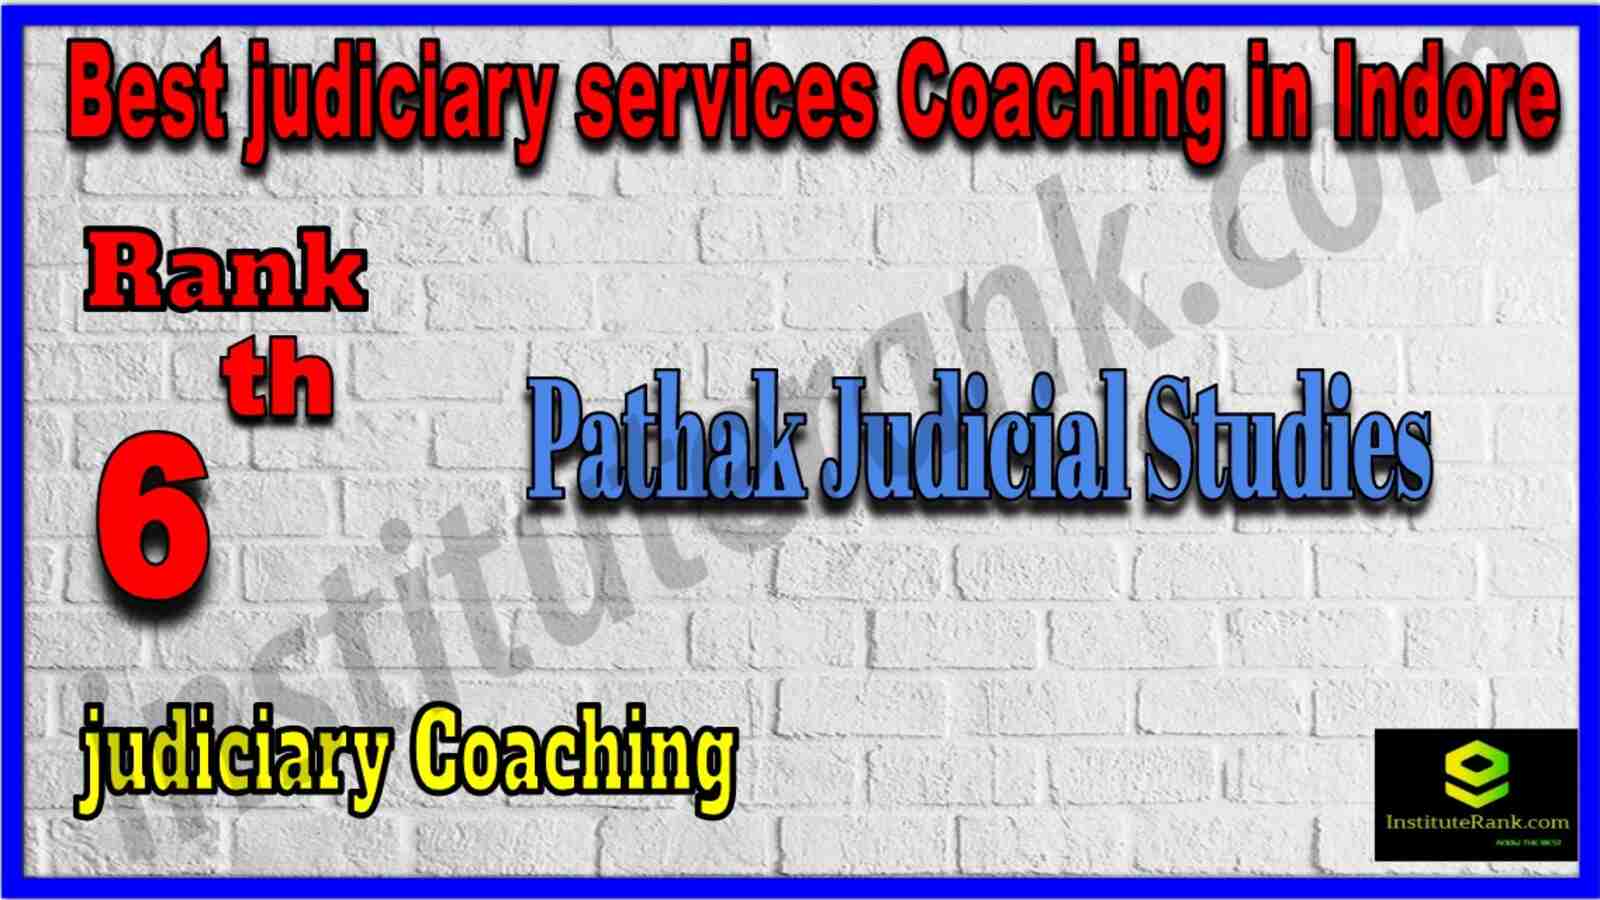 Rank 6 Best Judiciary Services coaching in Indore